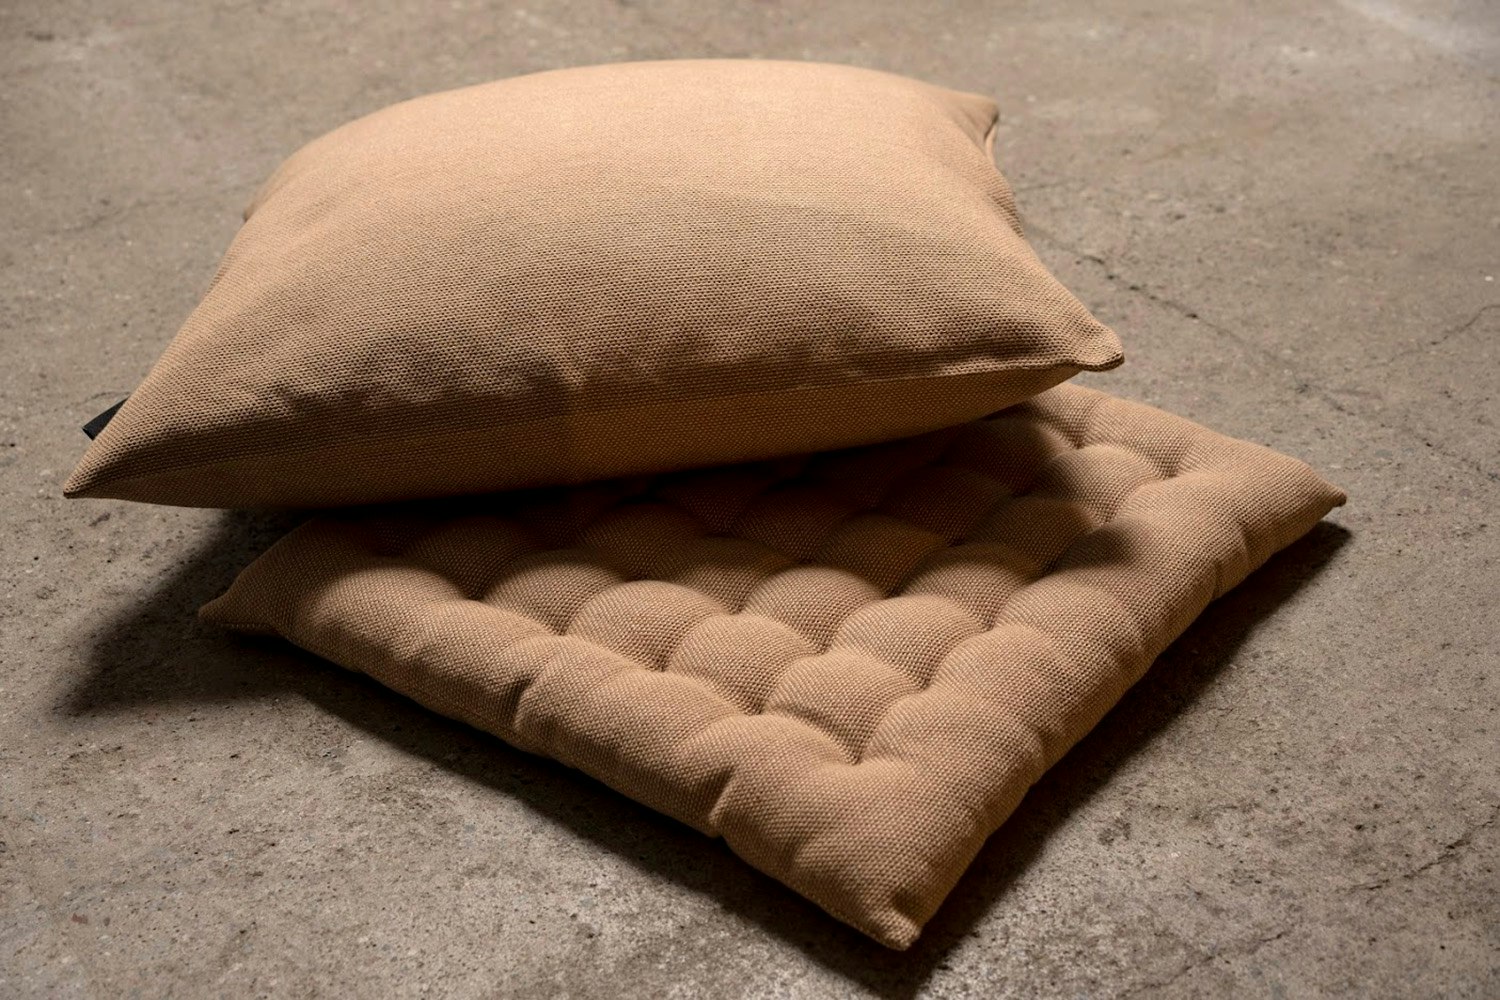 PEPPER seat cushion in creamy beige made of cotton